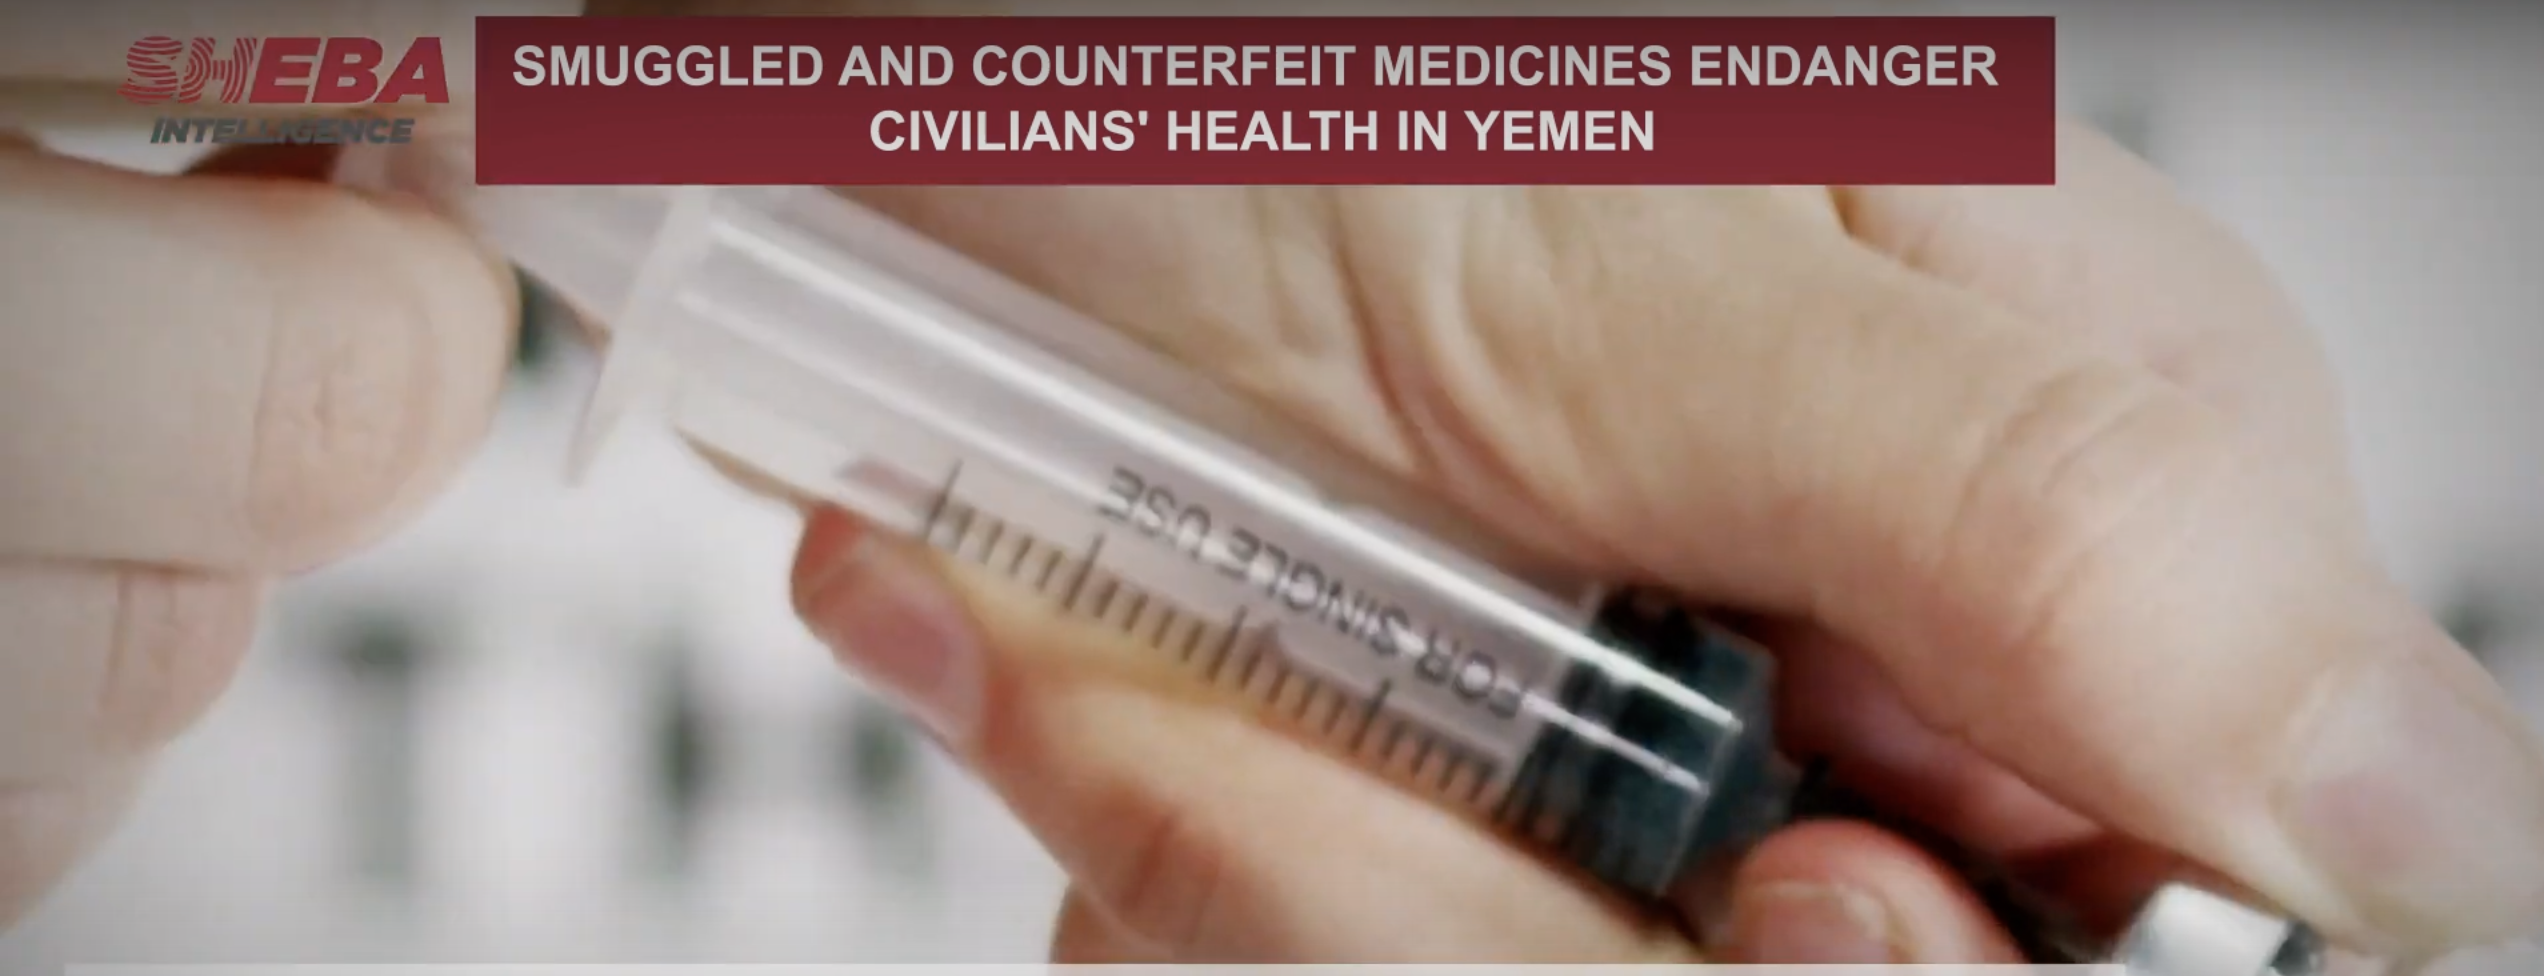 Smuggled and Counterfeit Medicines Endanger Civilians' Health in Yemen (Video)